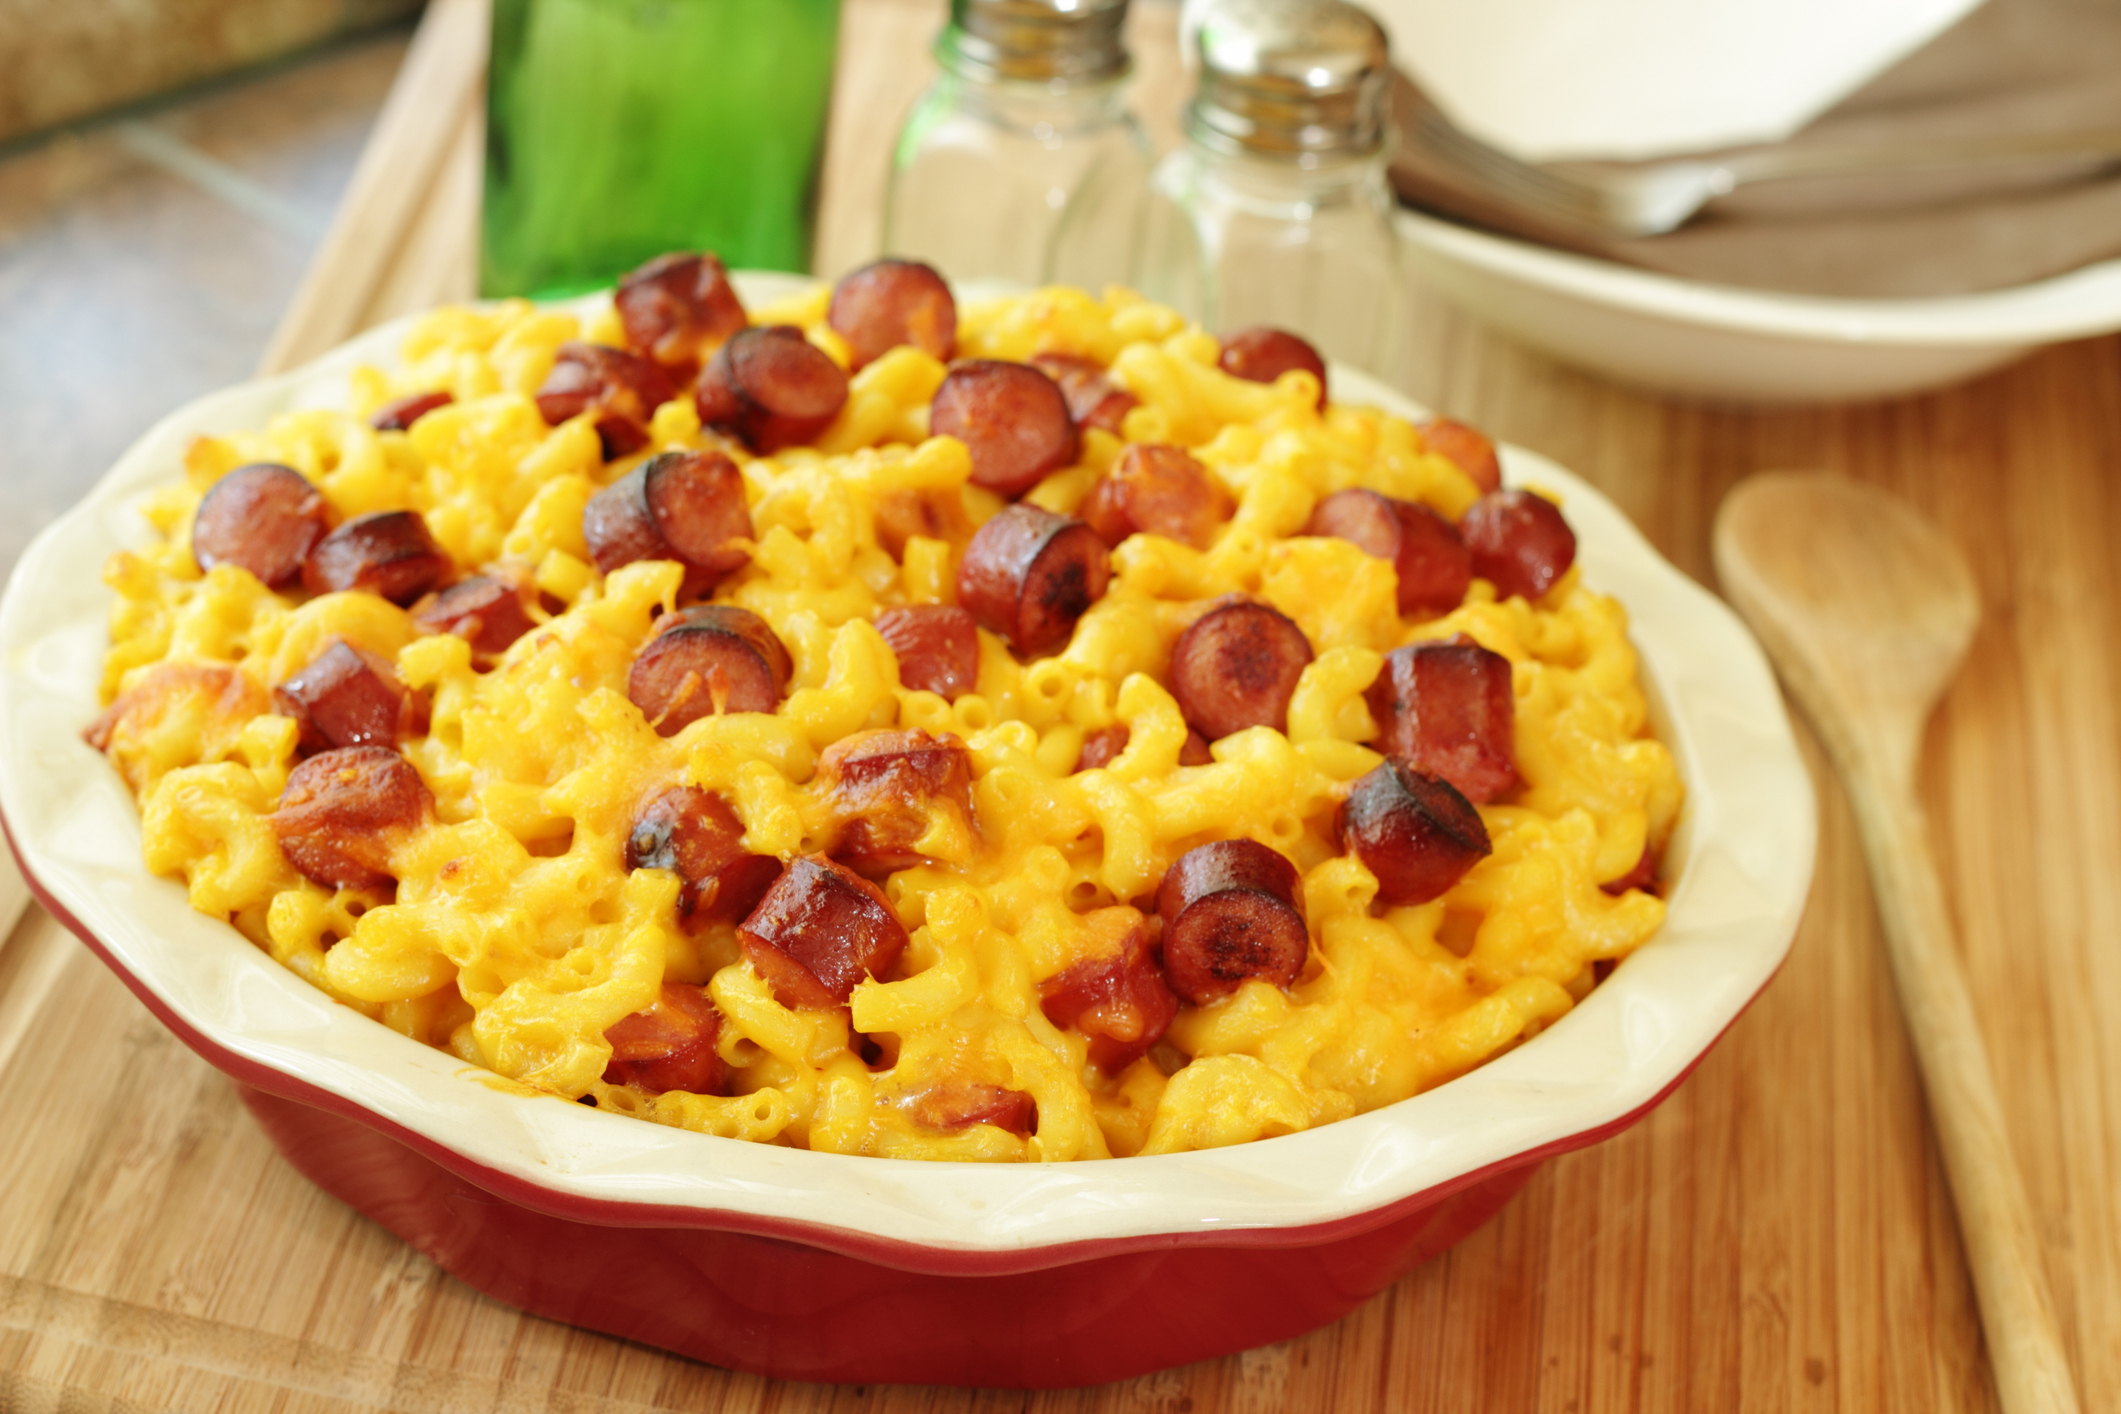 A dish of macaroni and cheese with sliced hot dogs mixed in, served on a wooden table